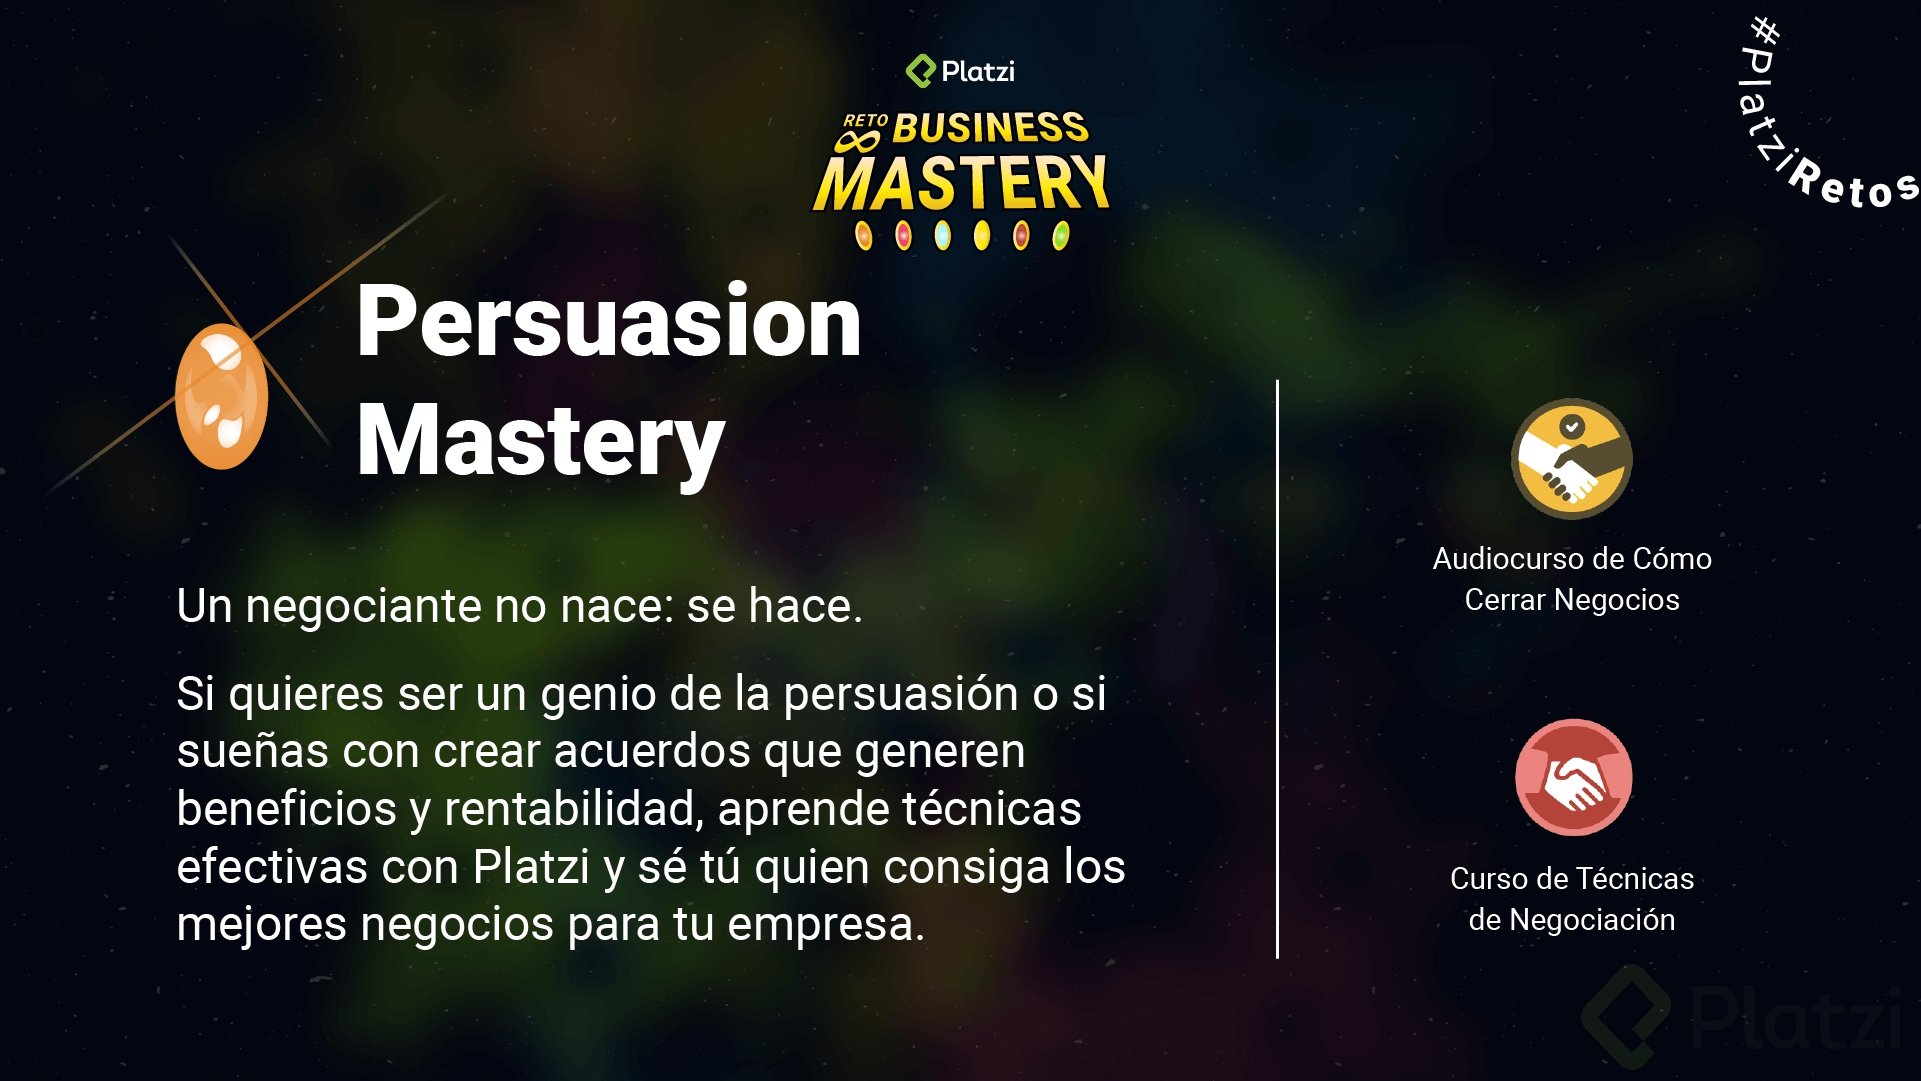 reto-business-mastery_16-9-persuasion-mastery.png